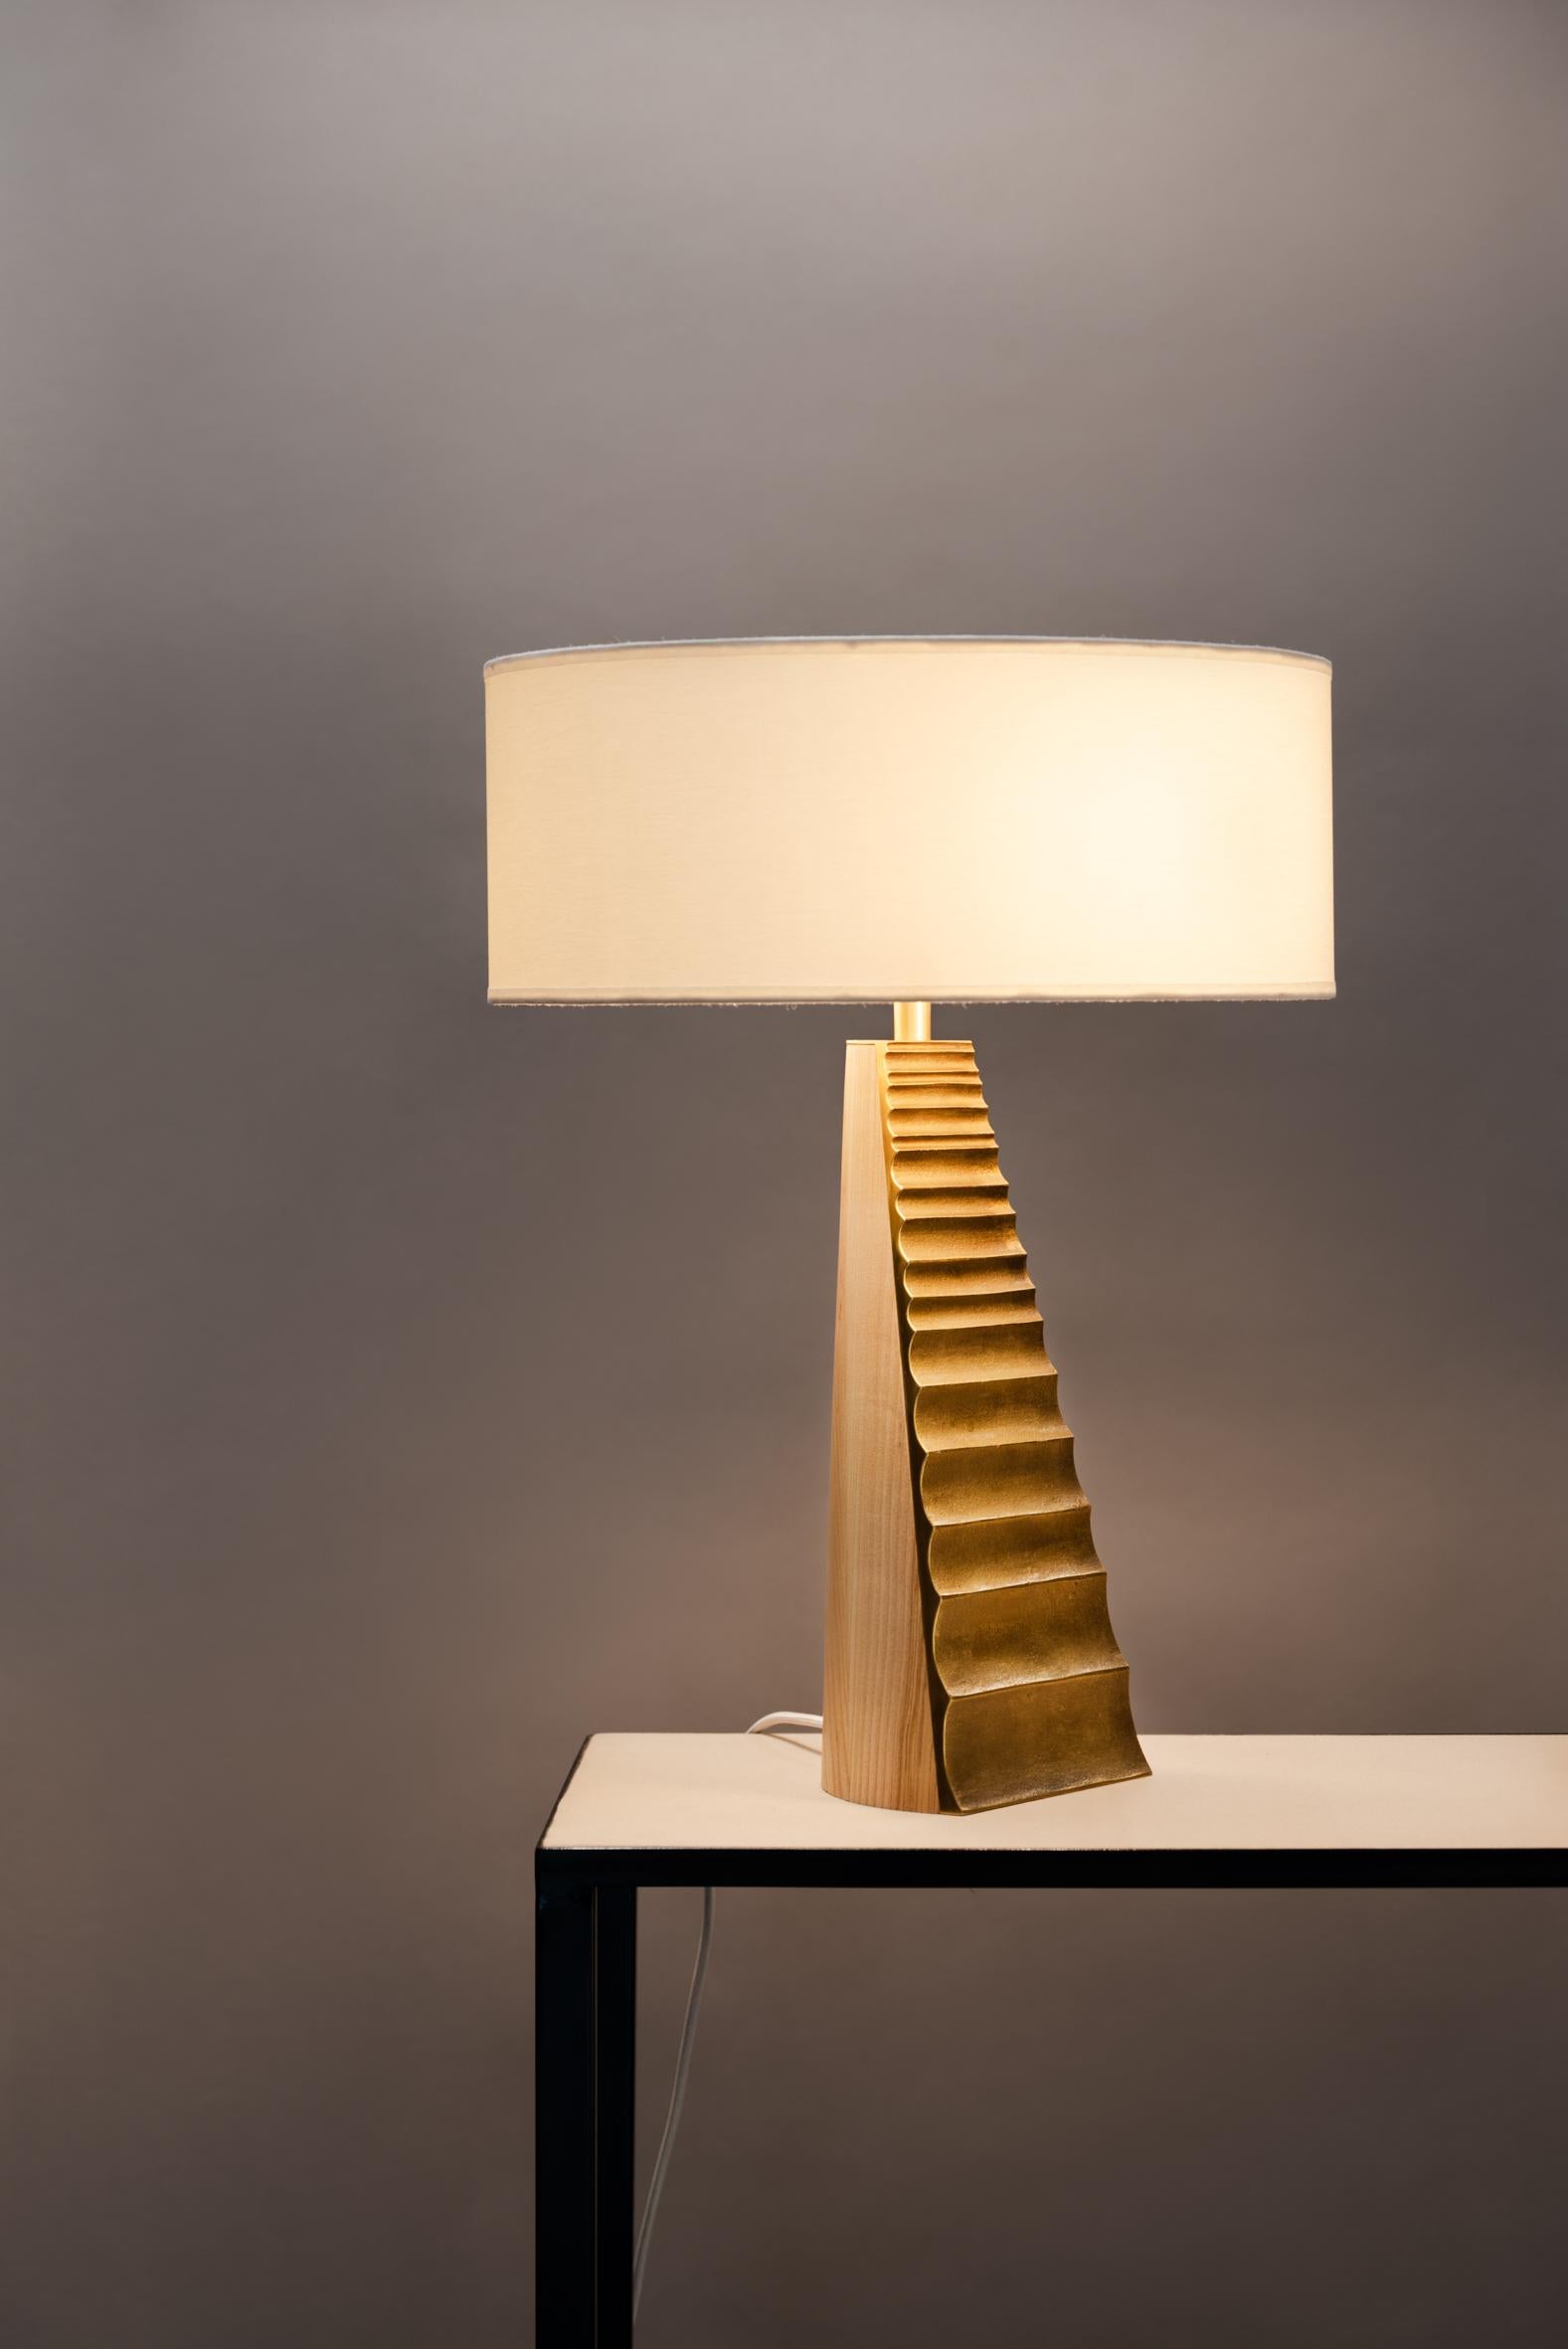 Babel table lamp by Atelier Demichelis
Numbered and Signed
Dimensions: D 45 x H 61 cm
Materials: bronze, brass, ash wood

Laura Demichelis

Laura was born & brought up in Provence, in the south of France.
Trained at the École Boulle in